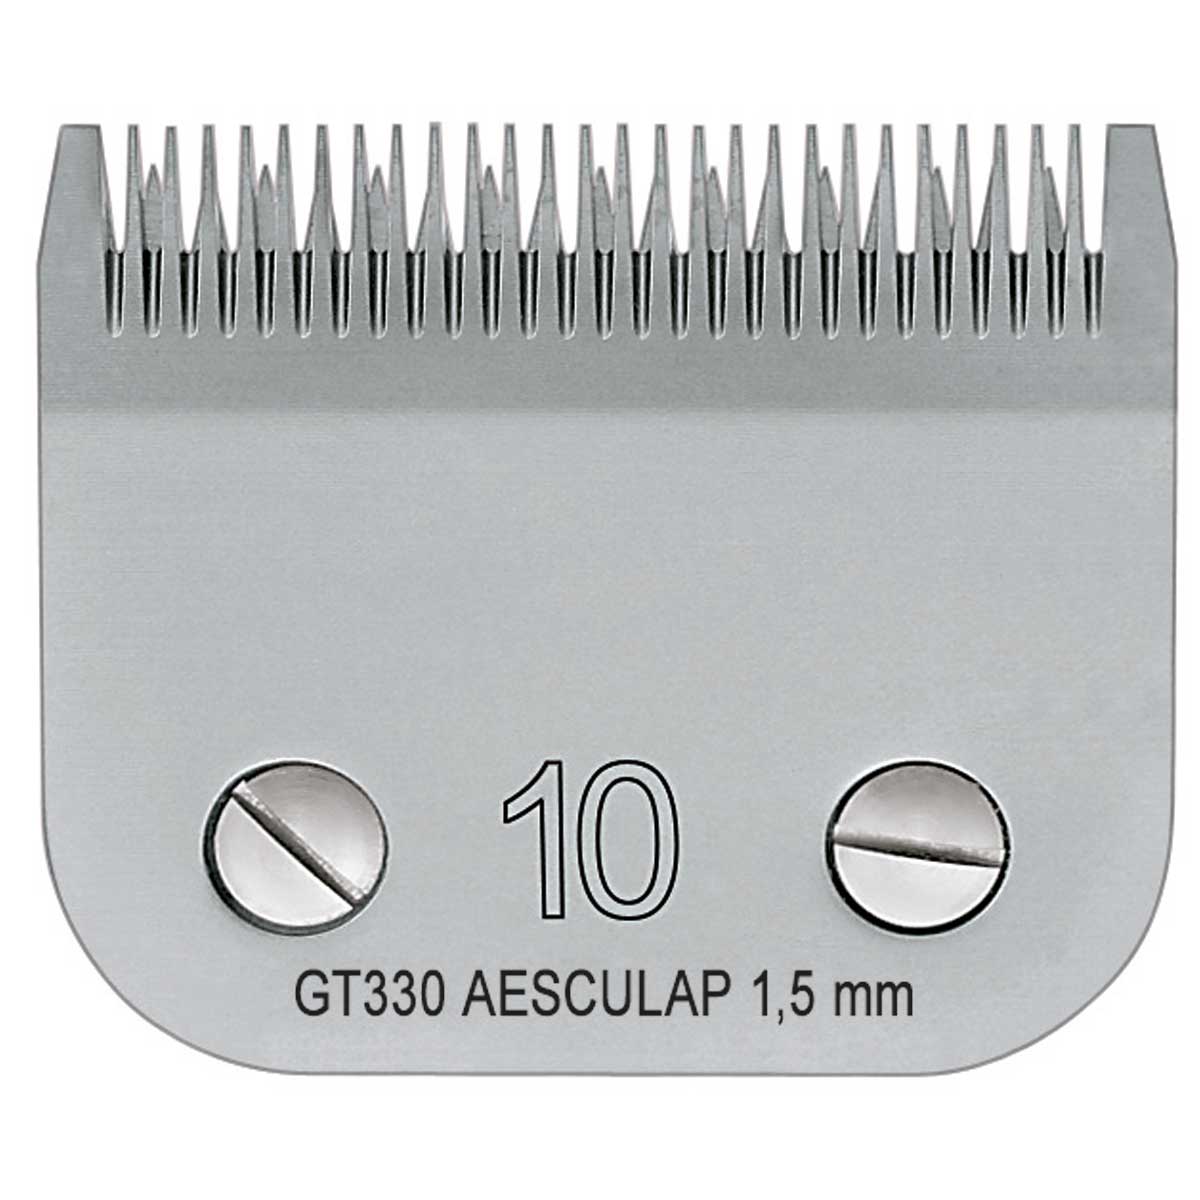 Aesculap Clipper Blade SnapOn 1,5 mm, GT330 #10